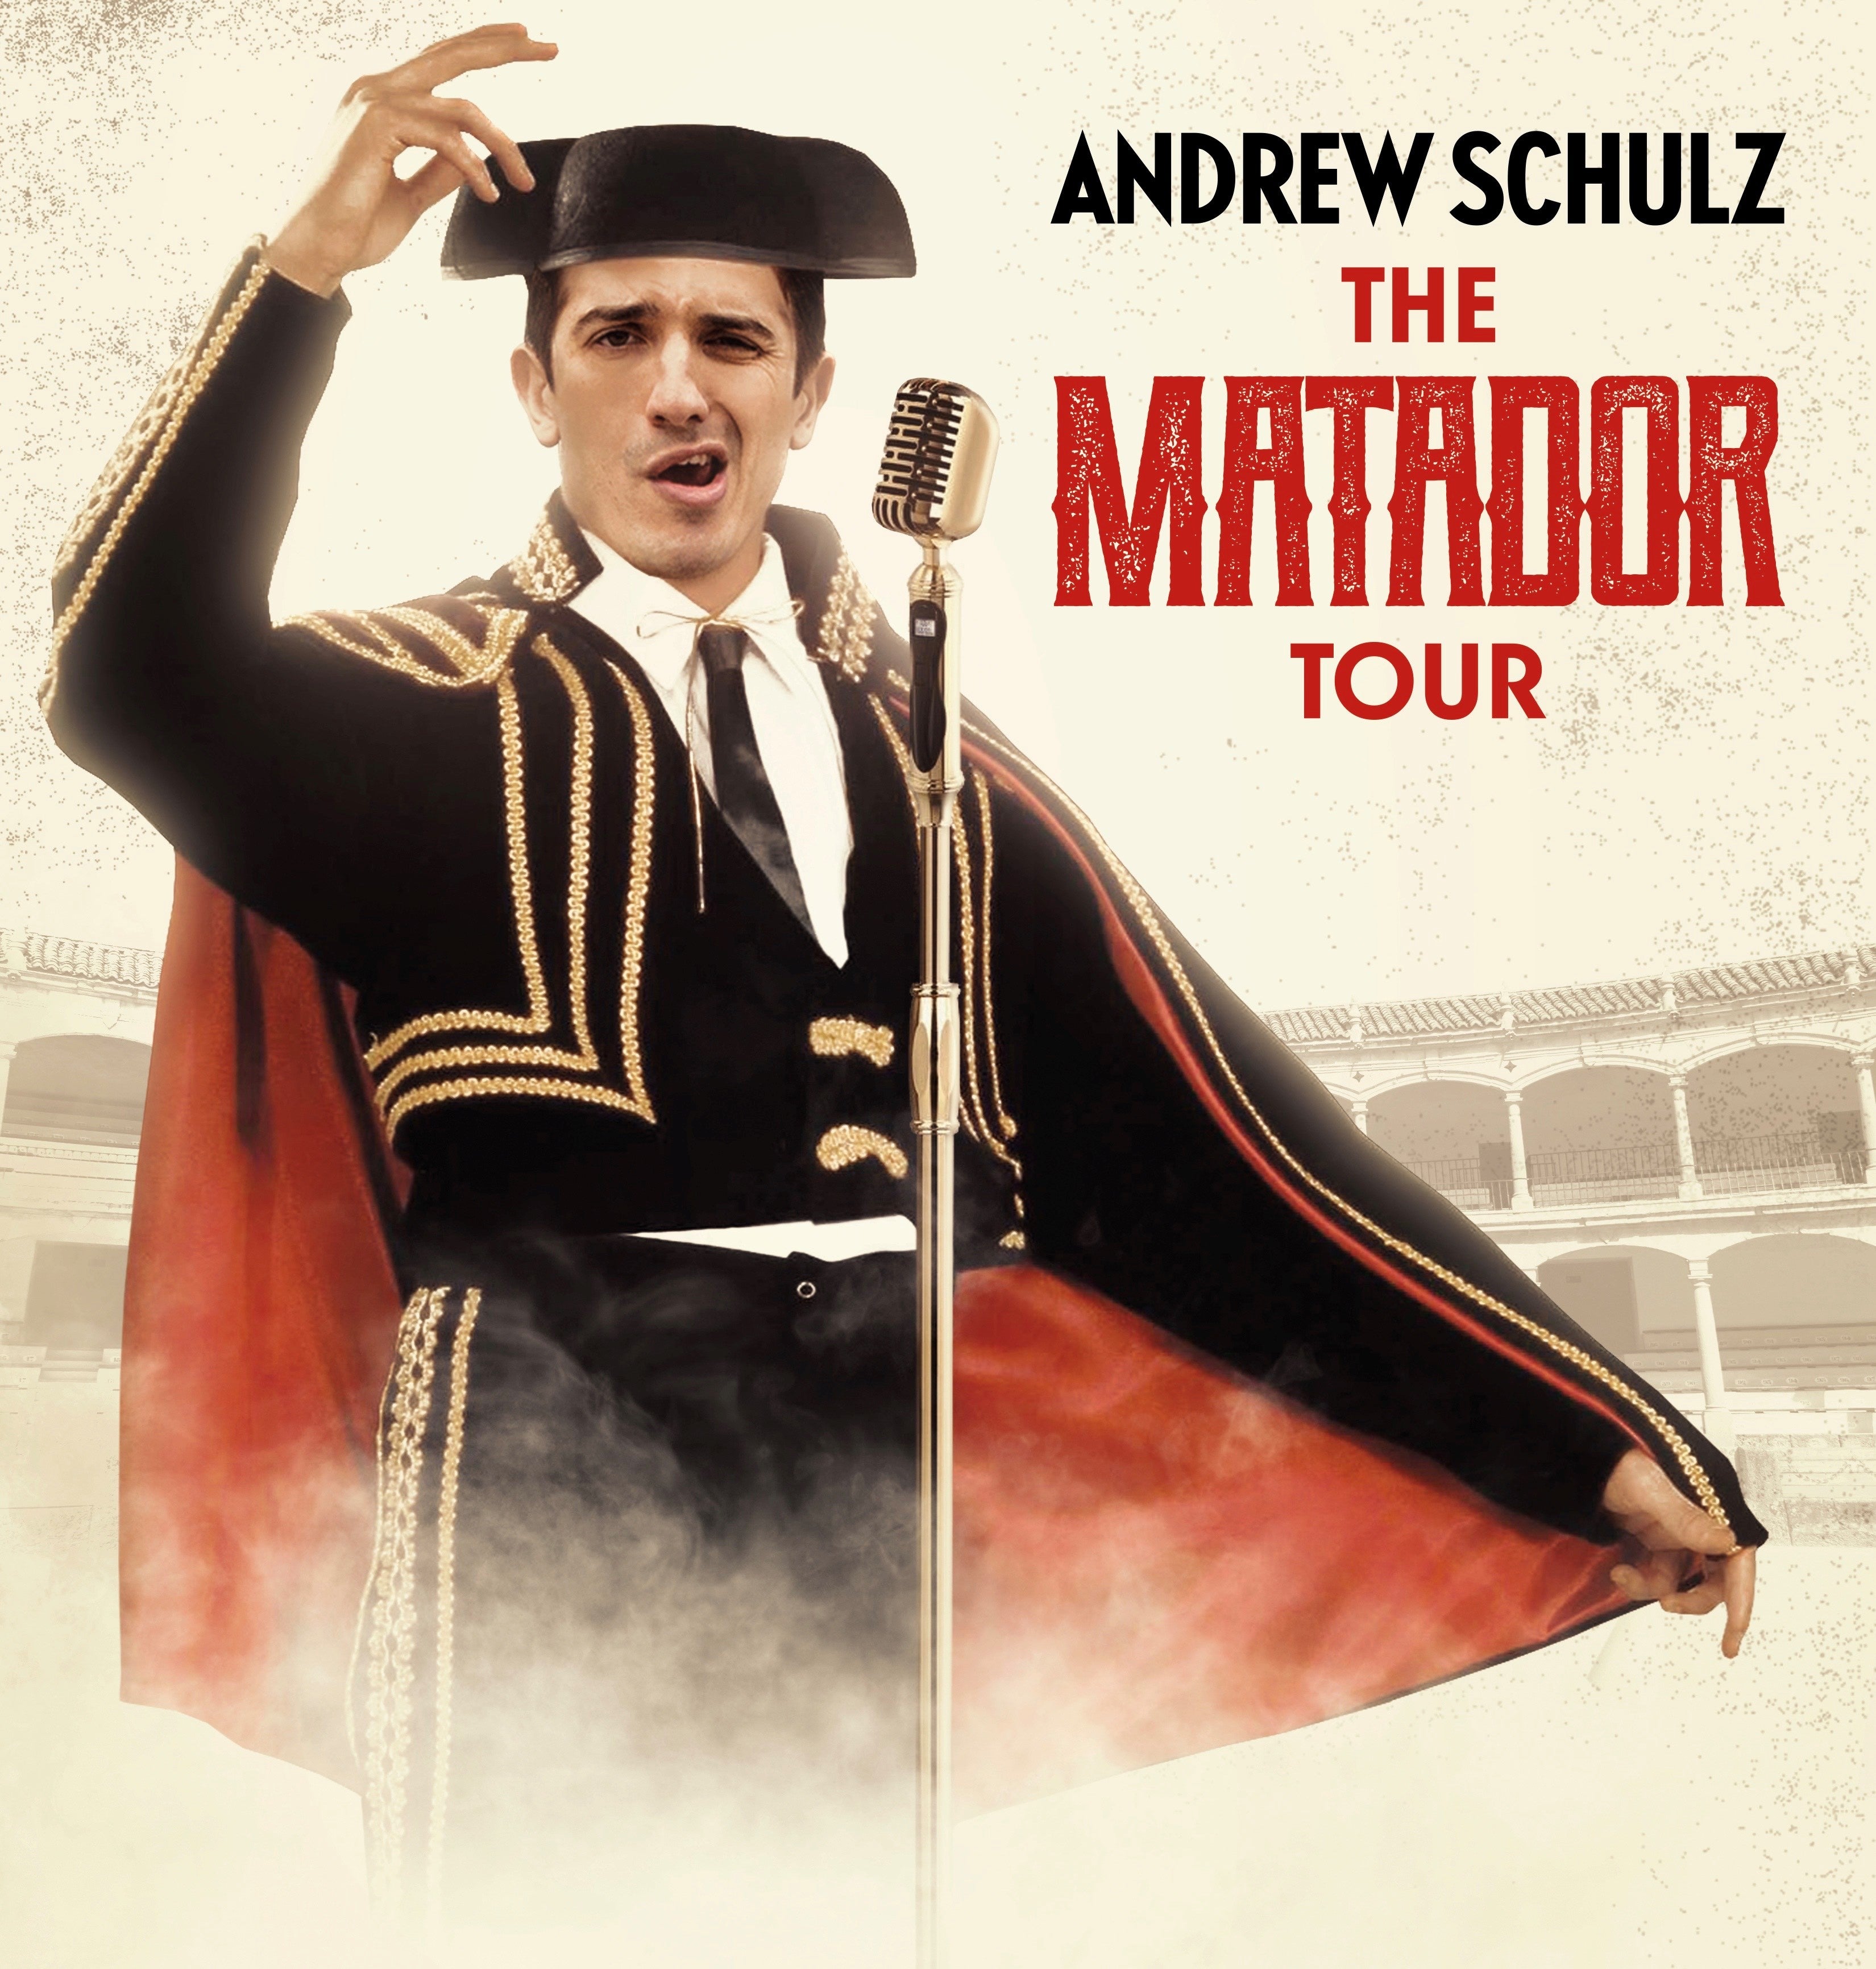 Andrew Schulz: The Life Tour at Elevation 27